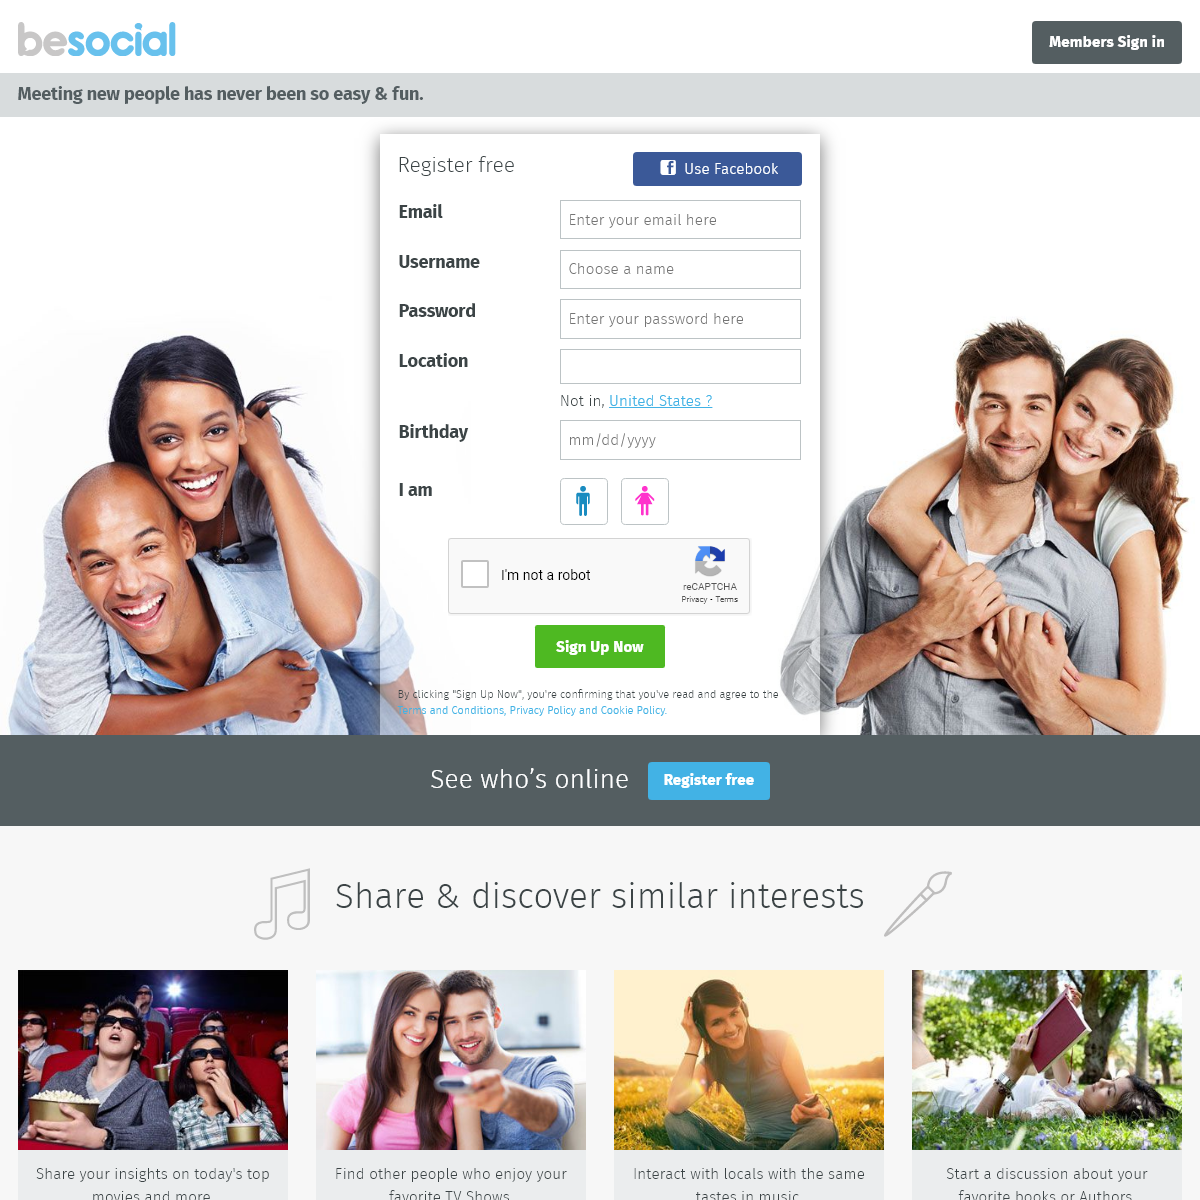 A complete backup of besocial.com